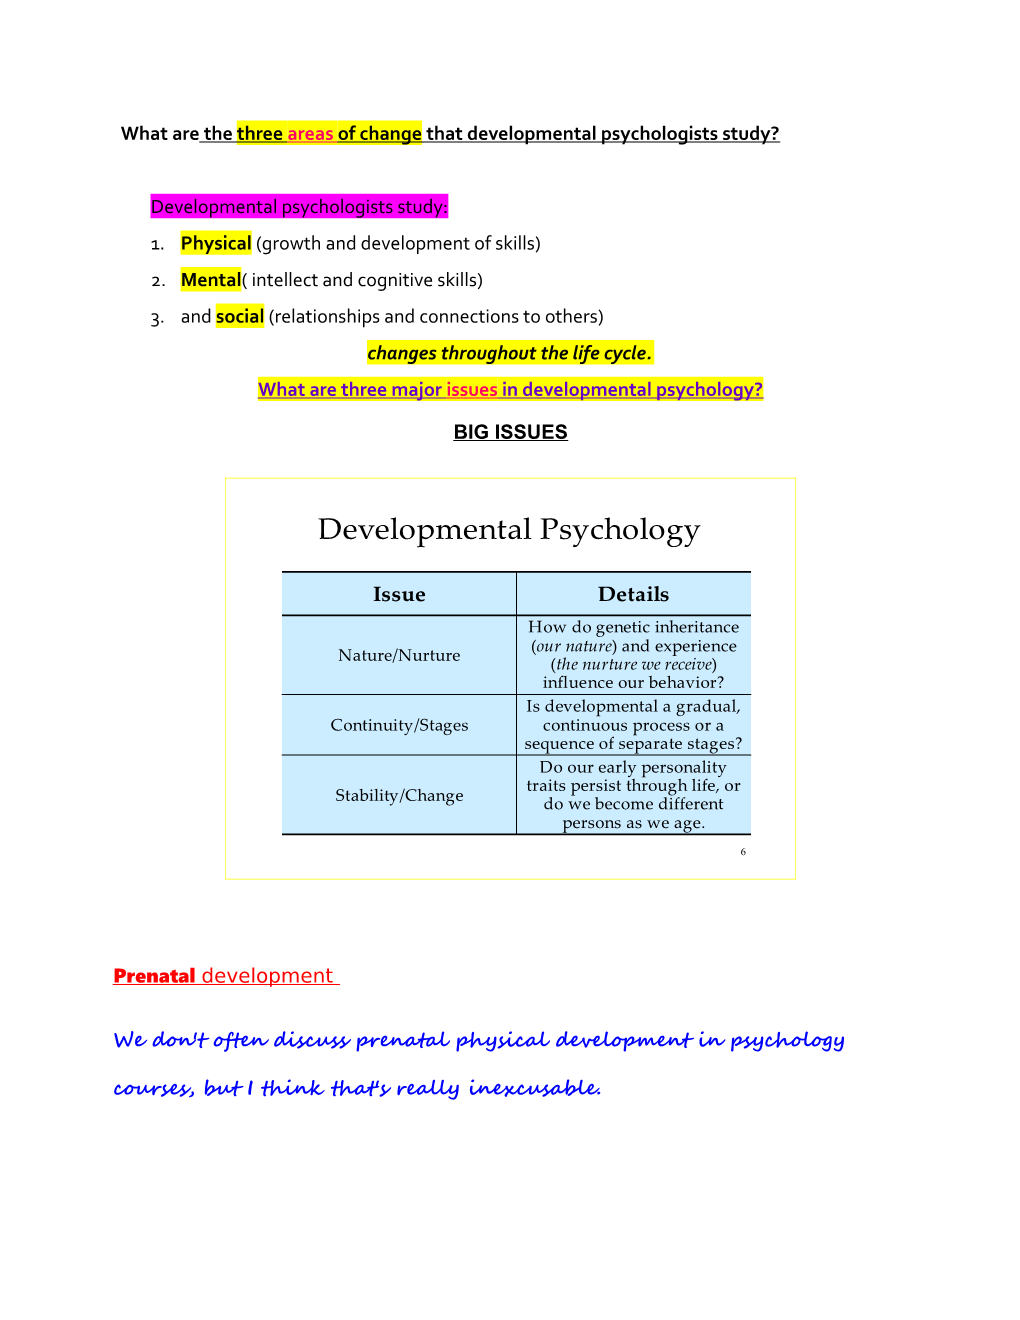 What Are the Three Areas of Change That Developmental Psychologists Study